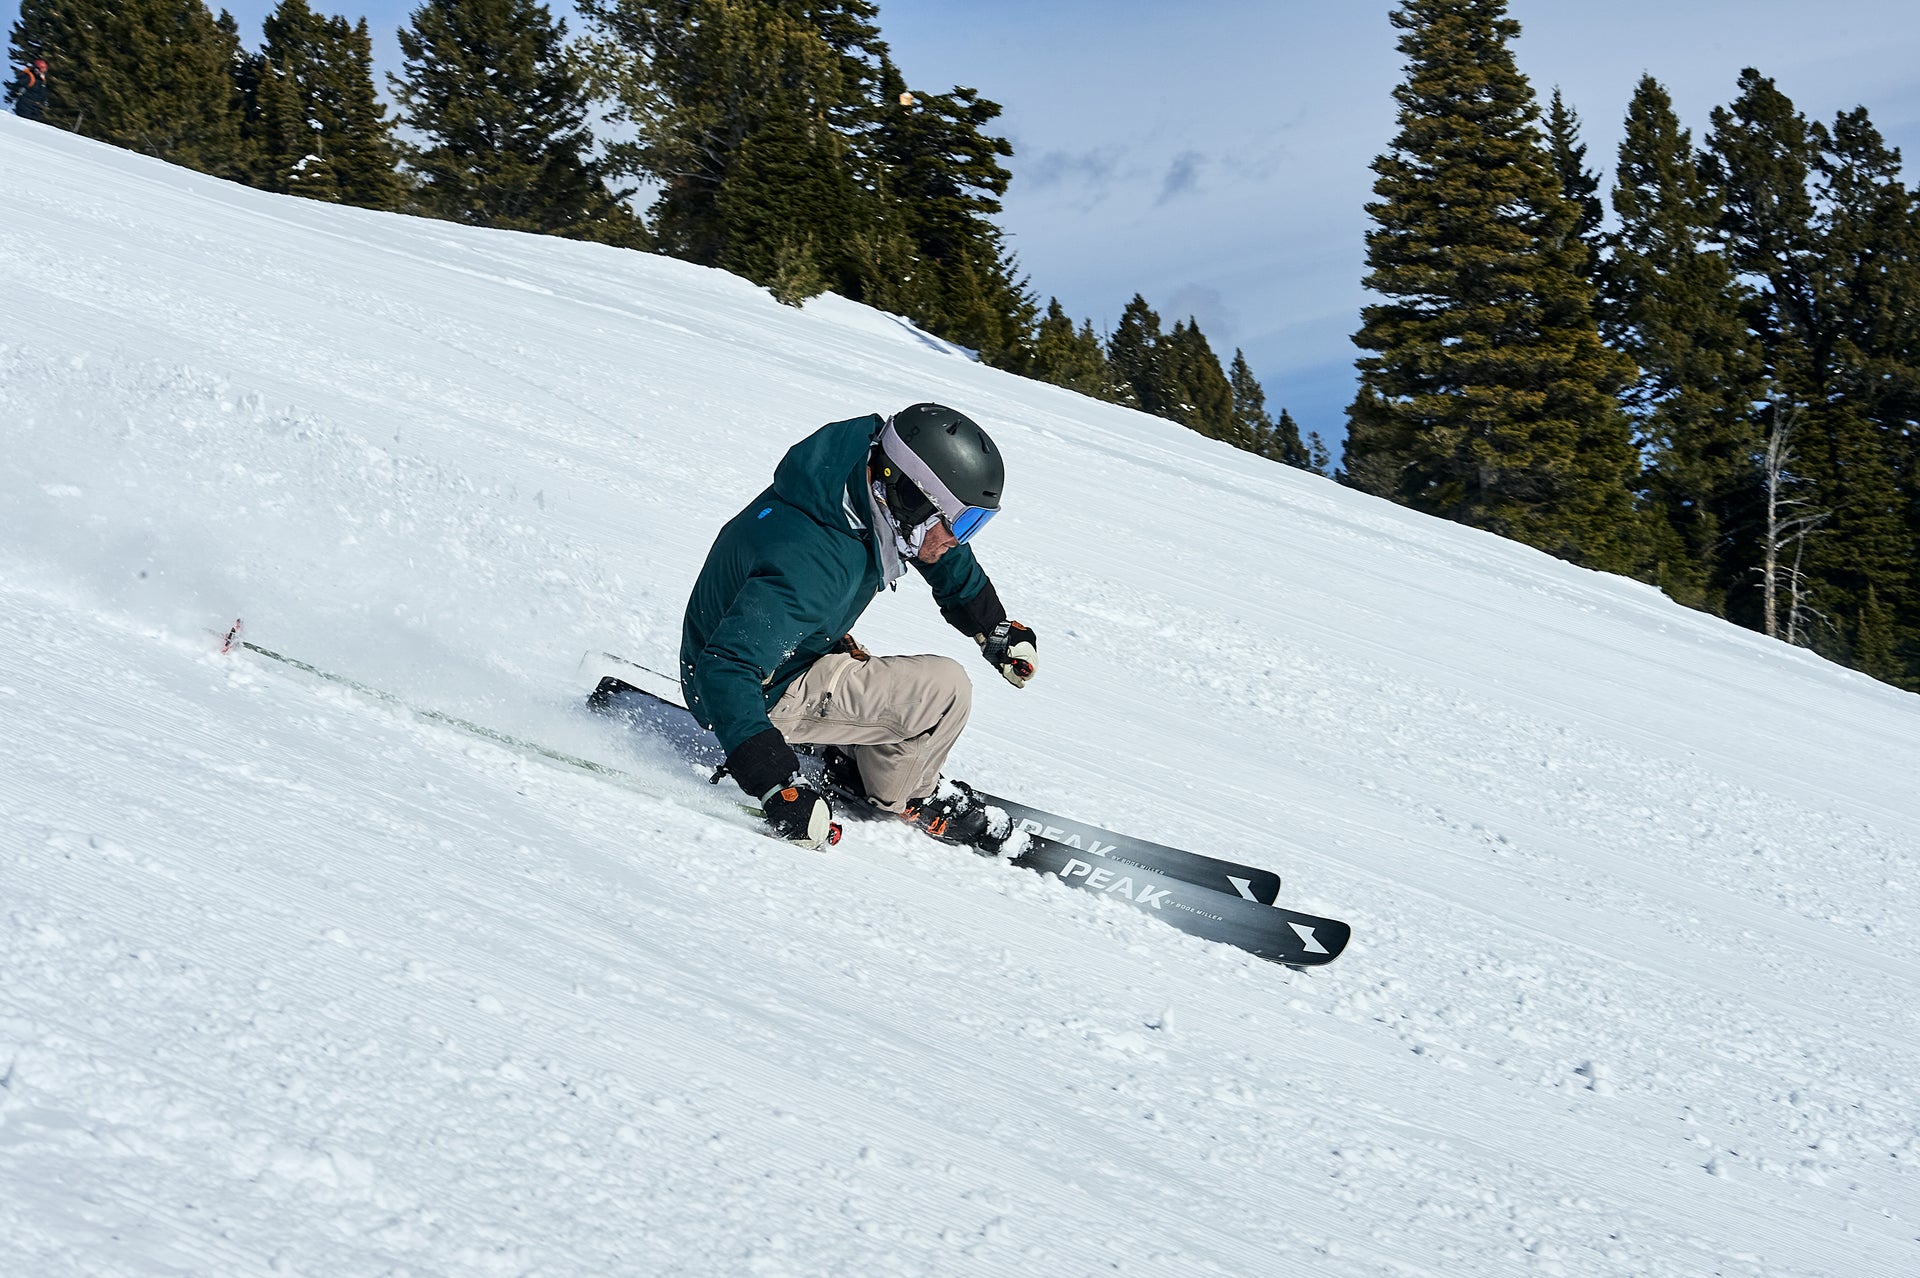 Skier carving a turn